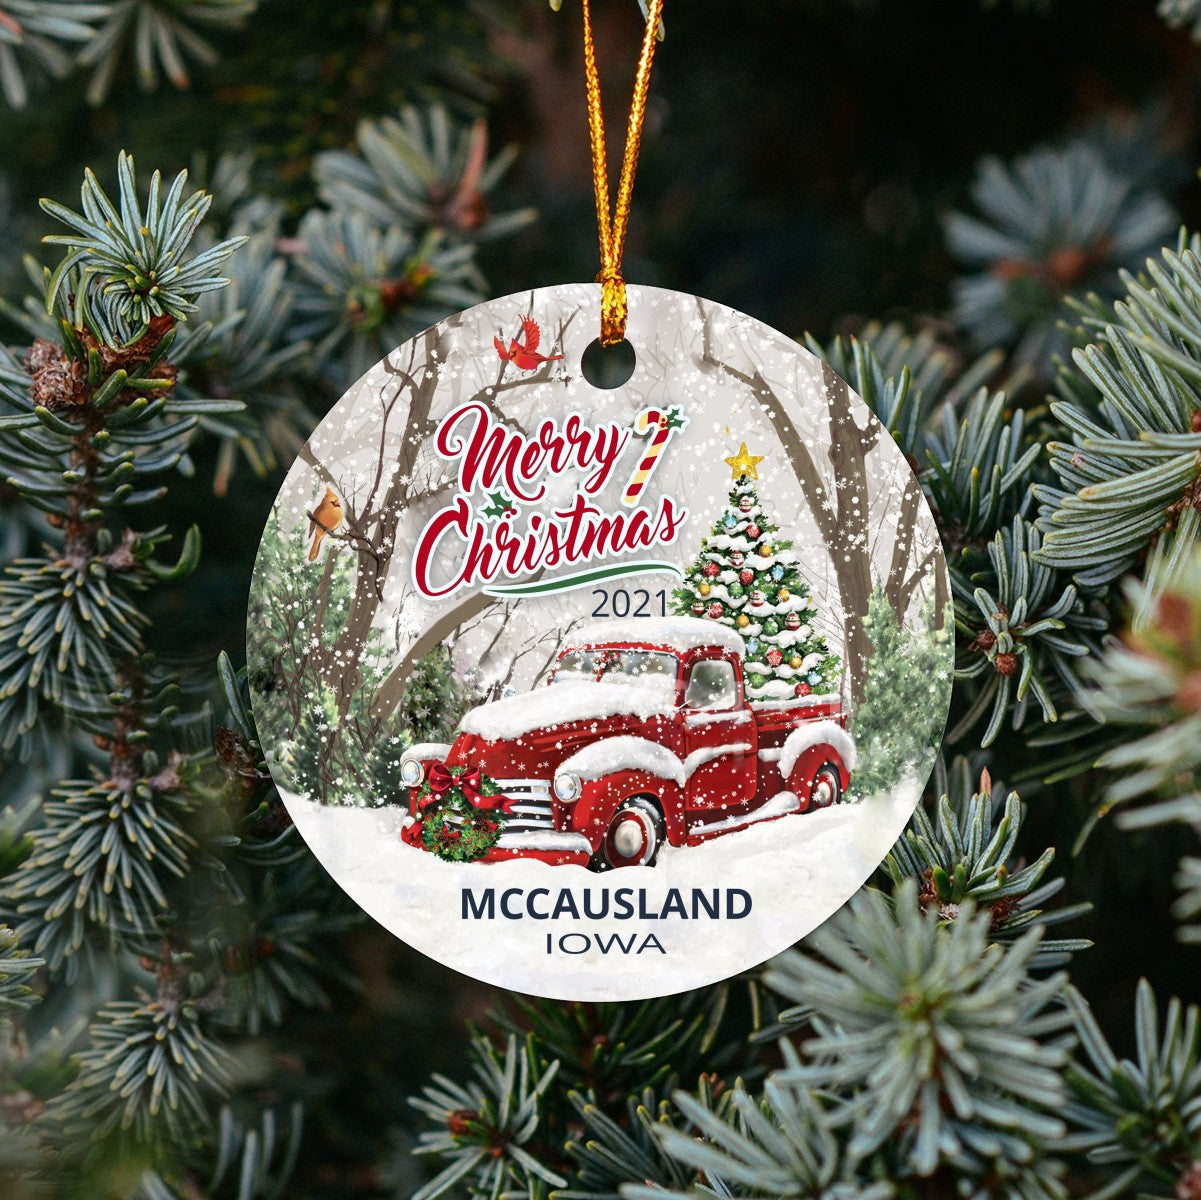 Christmas Tree Ornaments McCausland - Ornament With Name City, State McCausland Iowa IA Ornament - Red Truck Xmas Ornaments 3'' Plastic Gift For Family, Friend And Housewarming